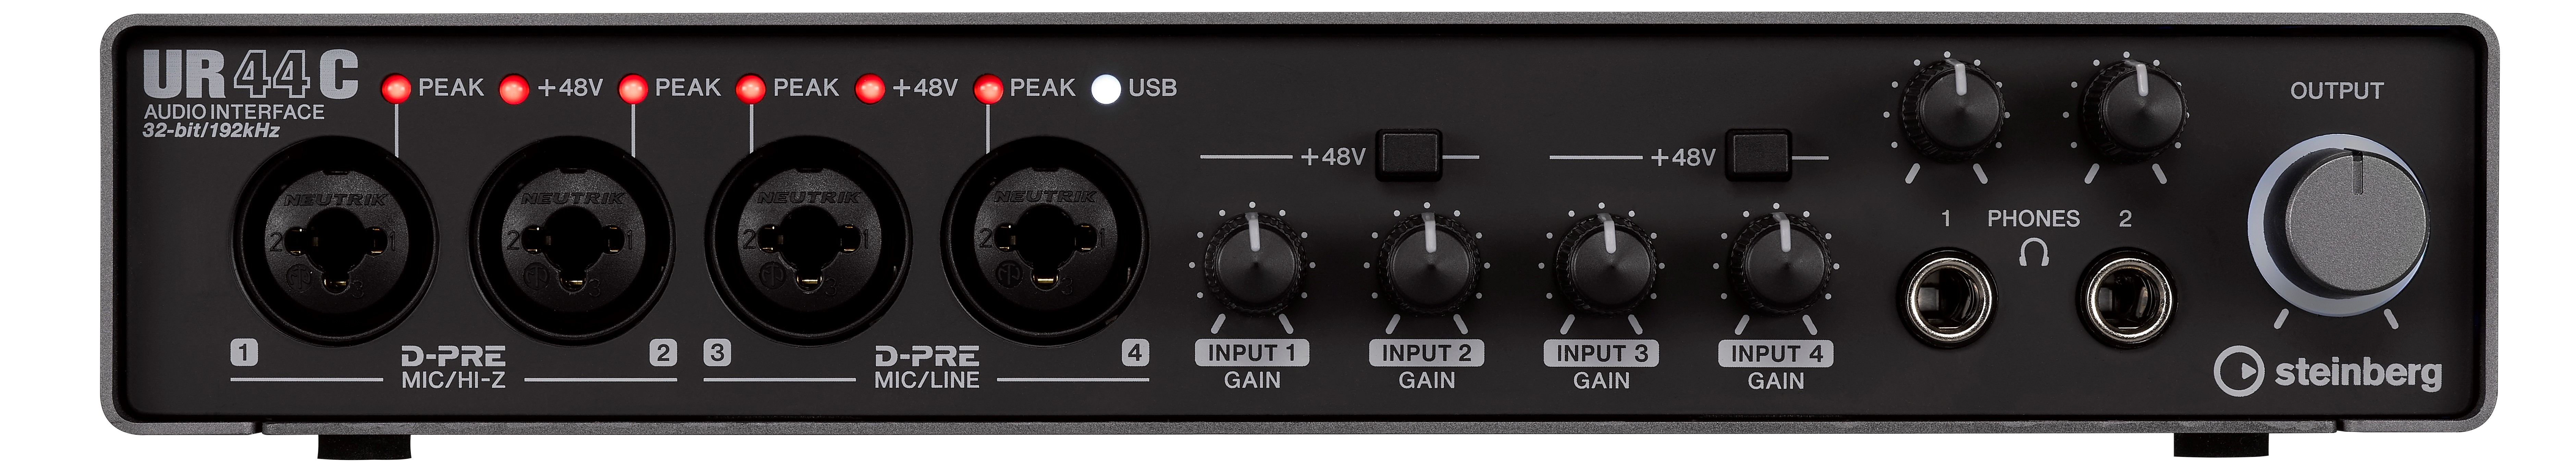 How Does an Audio Interface Work?